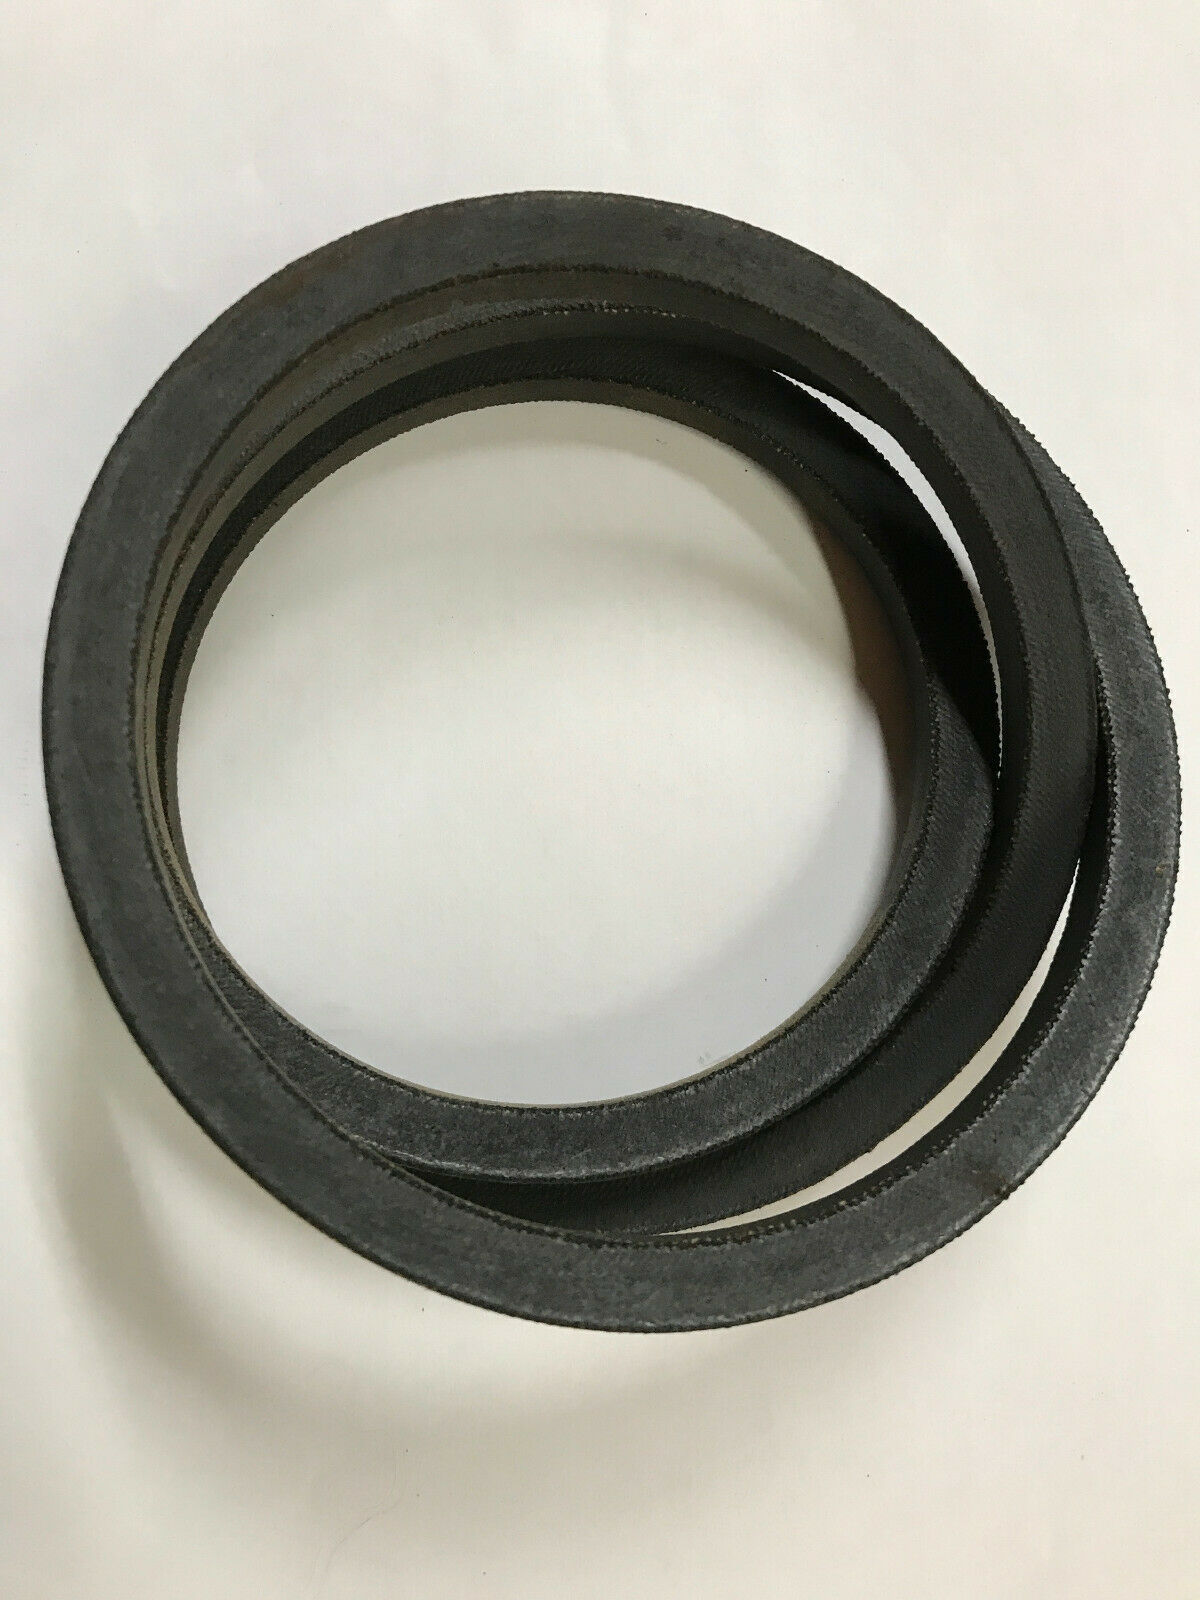 *NEW Replacement BELT*for Stens 258-112 for John Deere M95875 - $26.72